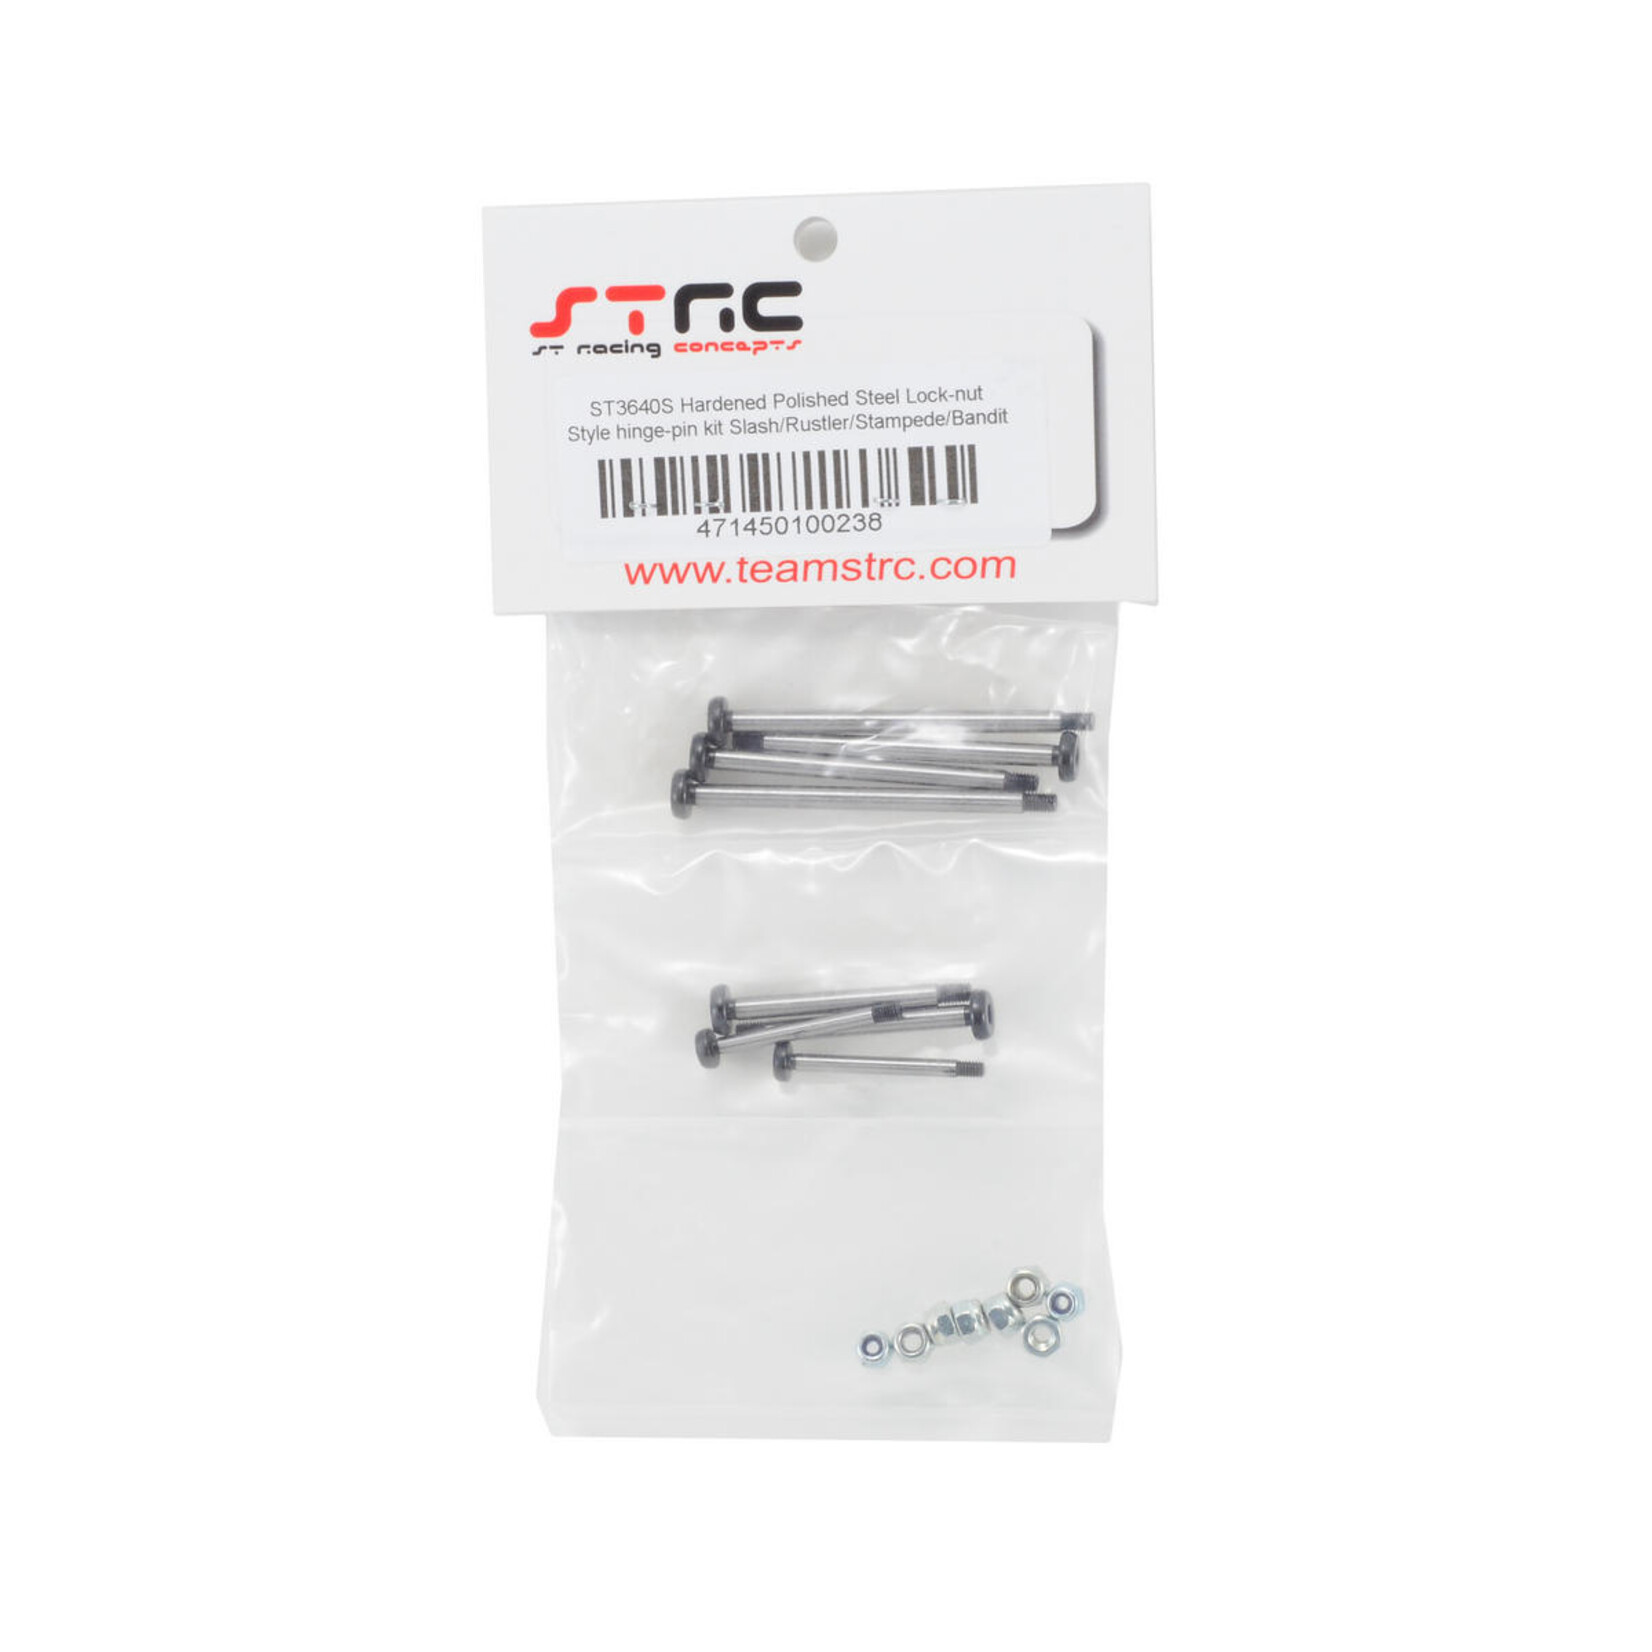 ST Racing Concepts ST Racing Concepts Traxxas Slash Polished Steel Hinge Pin w/Lock Nuts (Silver) #ST3640S